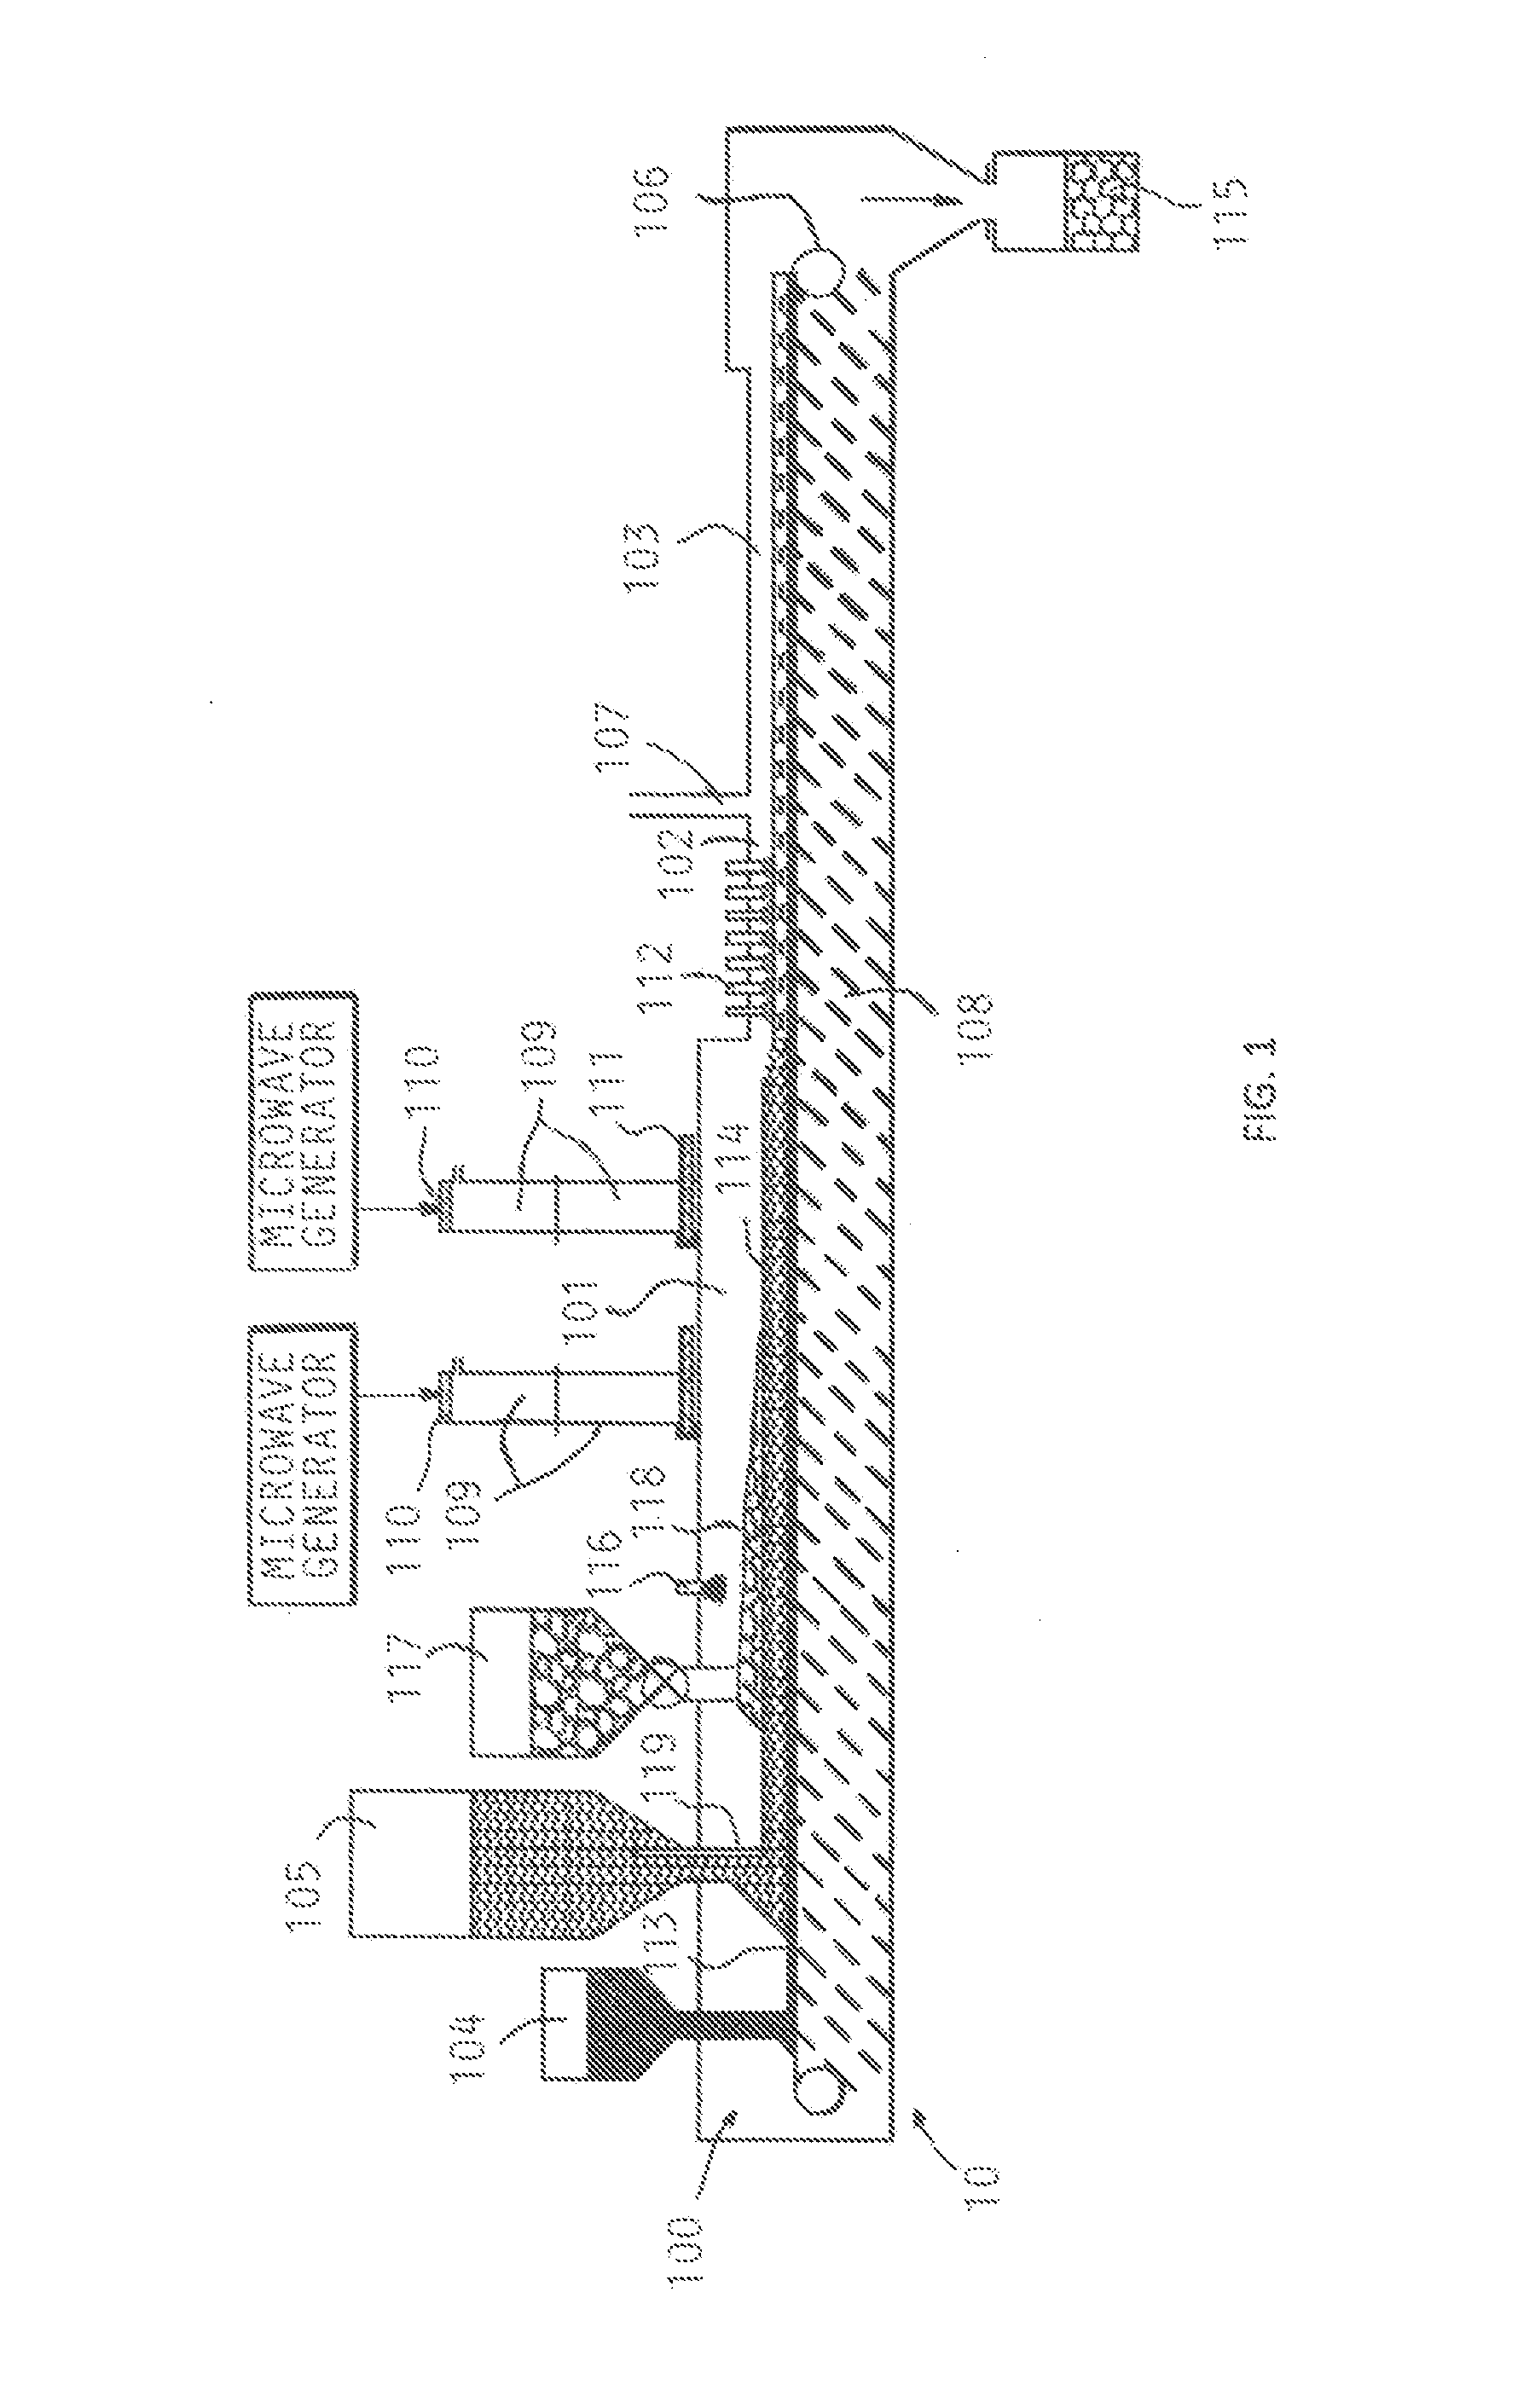 Method and apparatus for coproduction of pig iron and high quality syngas